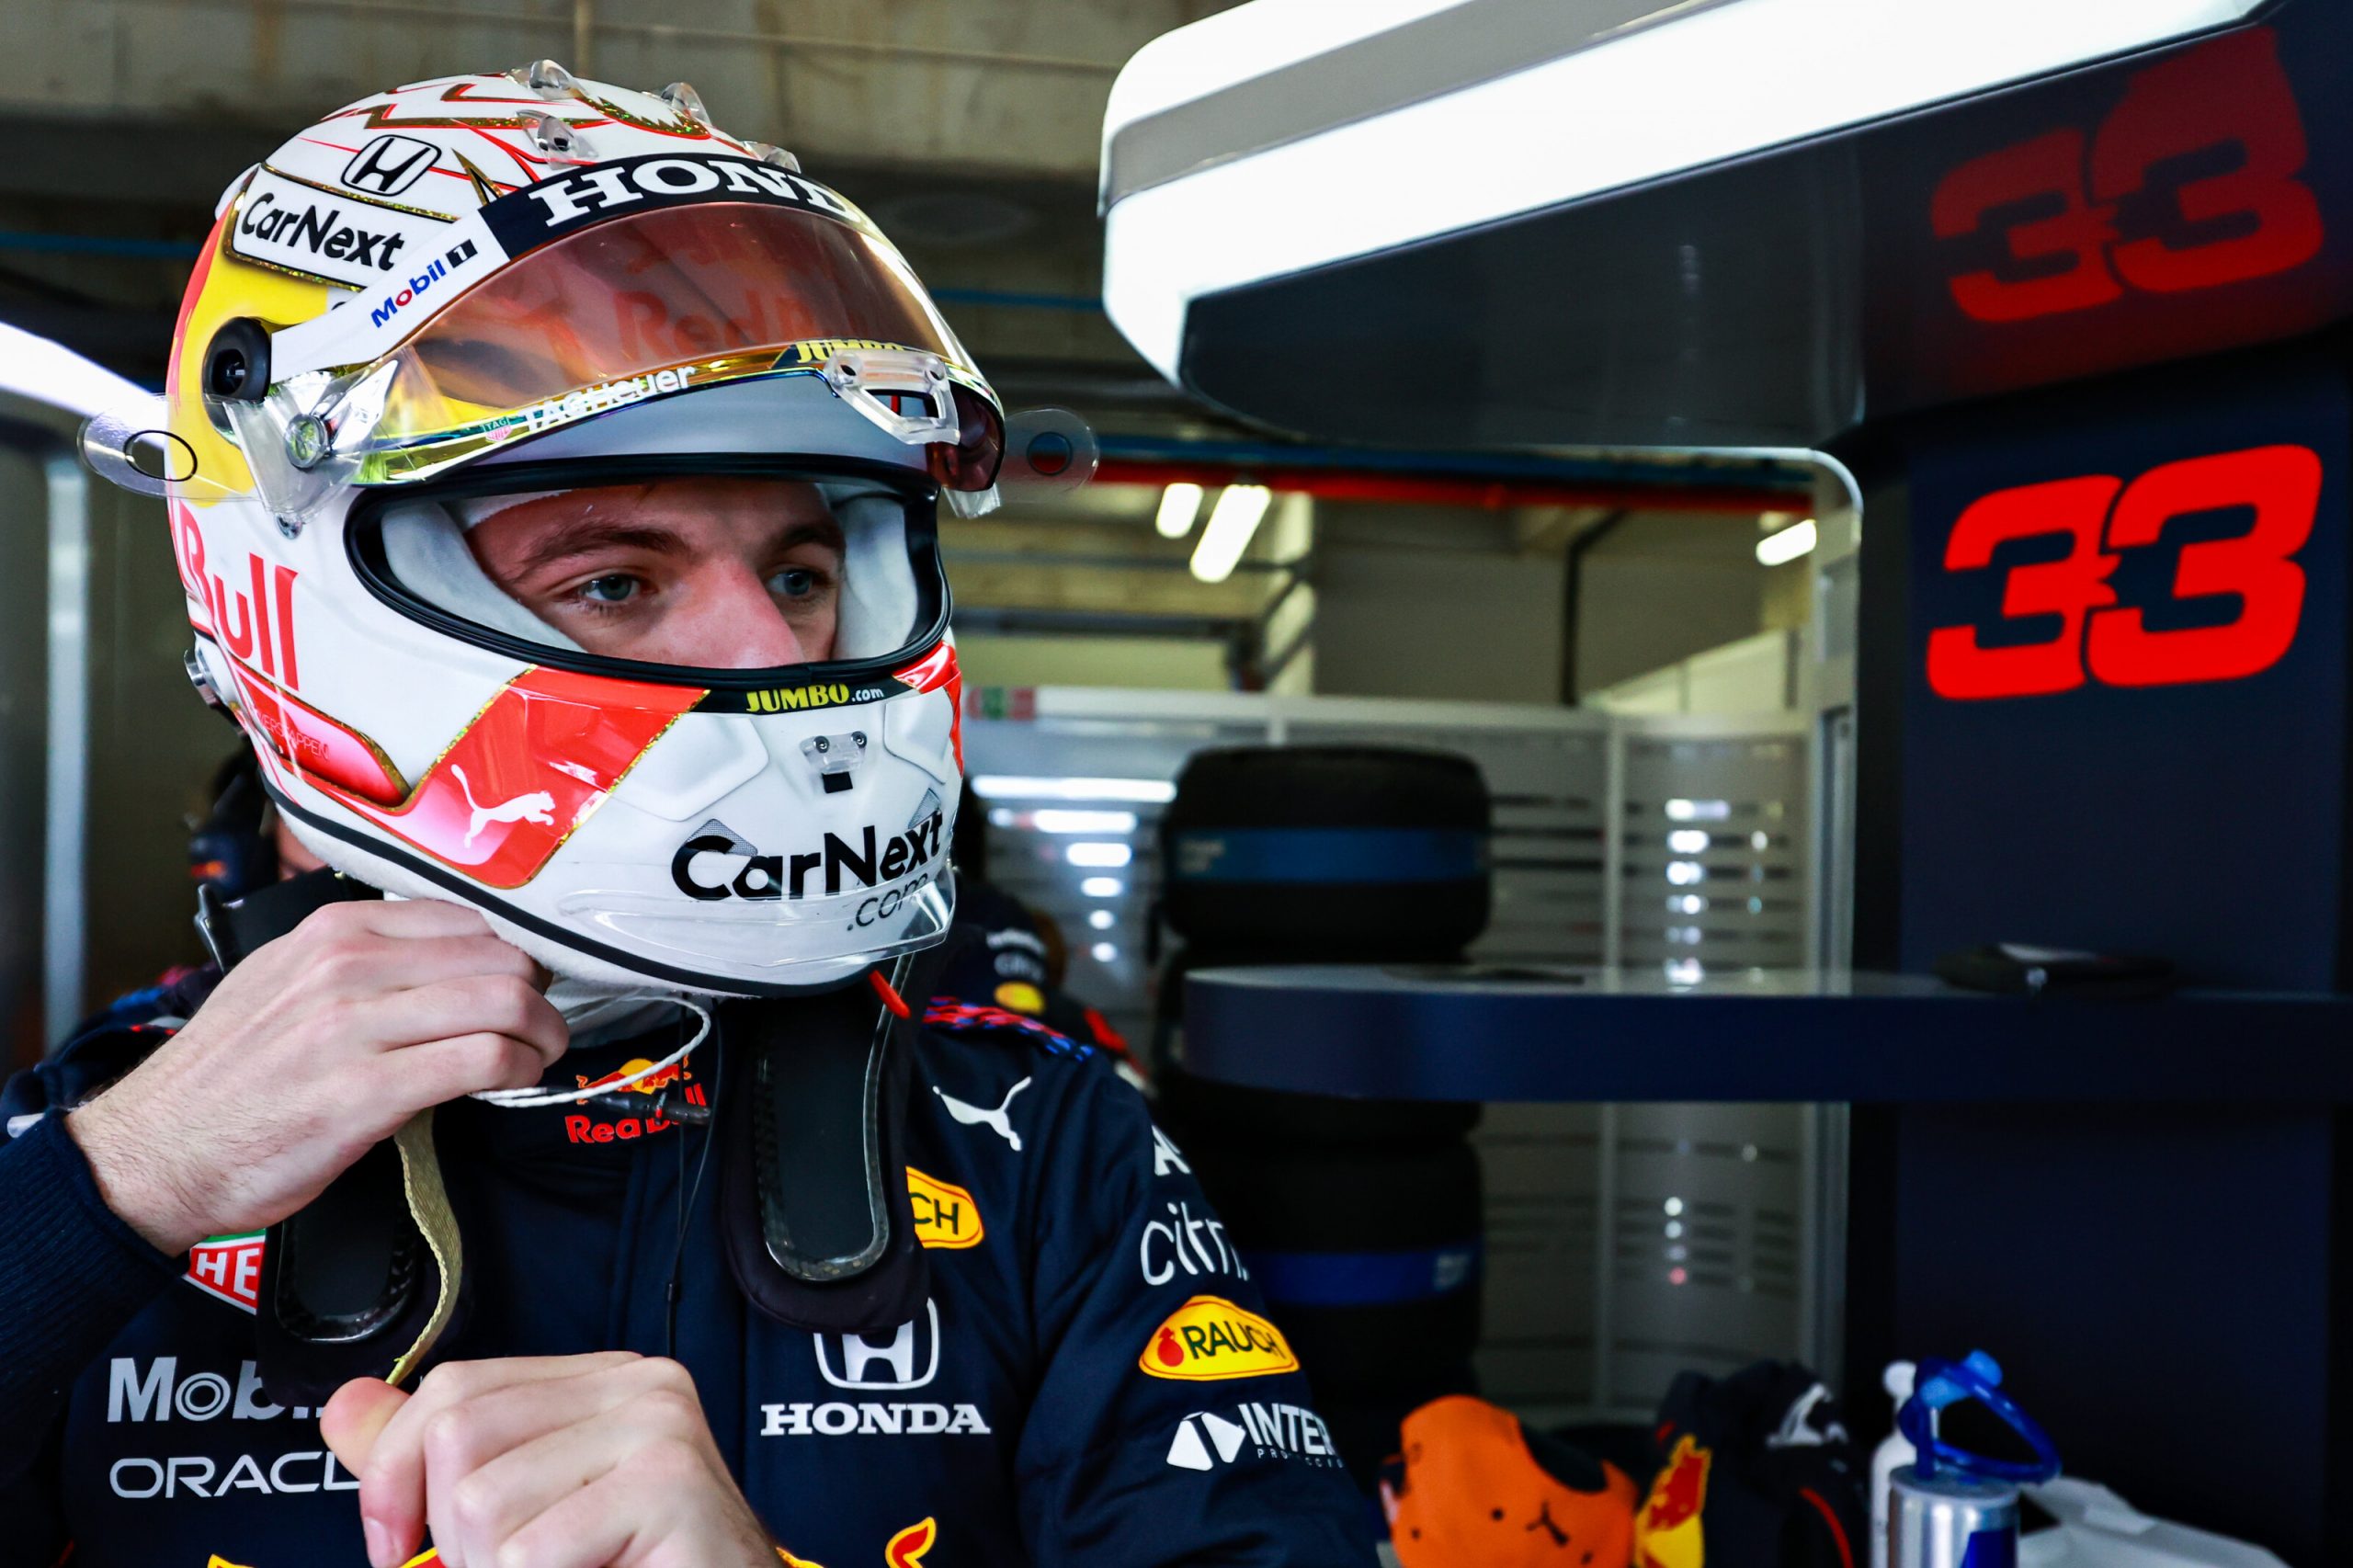 PORTIMAO, PORTUGAL - MAY 02: Max Verstappen of Netherlands and Red Bull Racing prepares to drive in the garage ahead of the F1 Grand Prix of Portugal at Autodromo Internacional Do Algarve on May 02, 2021 in Portimao, Portugal. (Photo by Mark Thompson/Getty Images) // Getty Images / Red Bull Content Pool  // SI202105020089 // Usage for editorial use only //